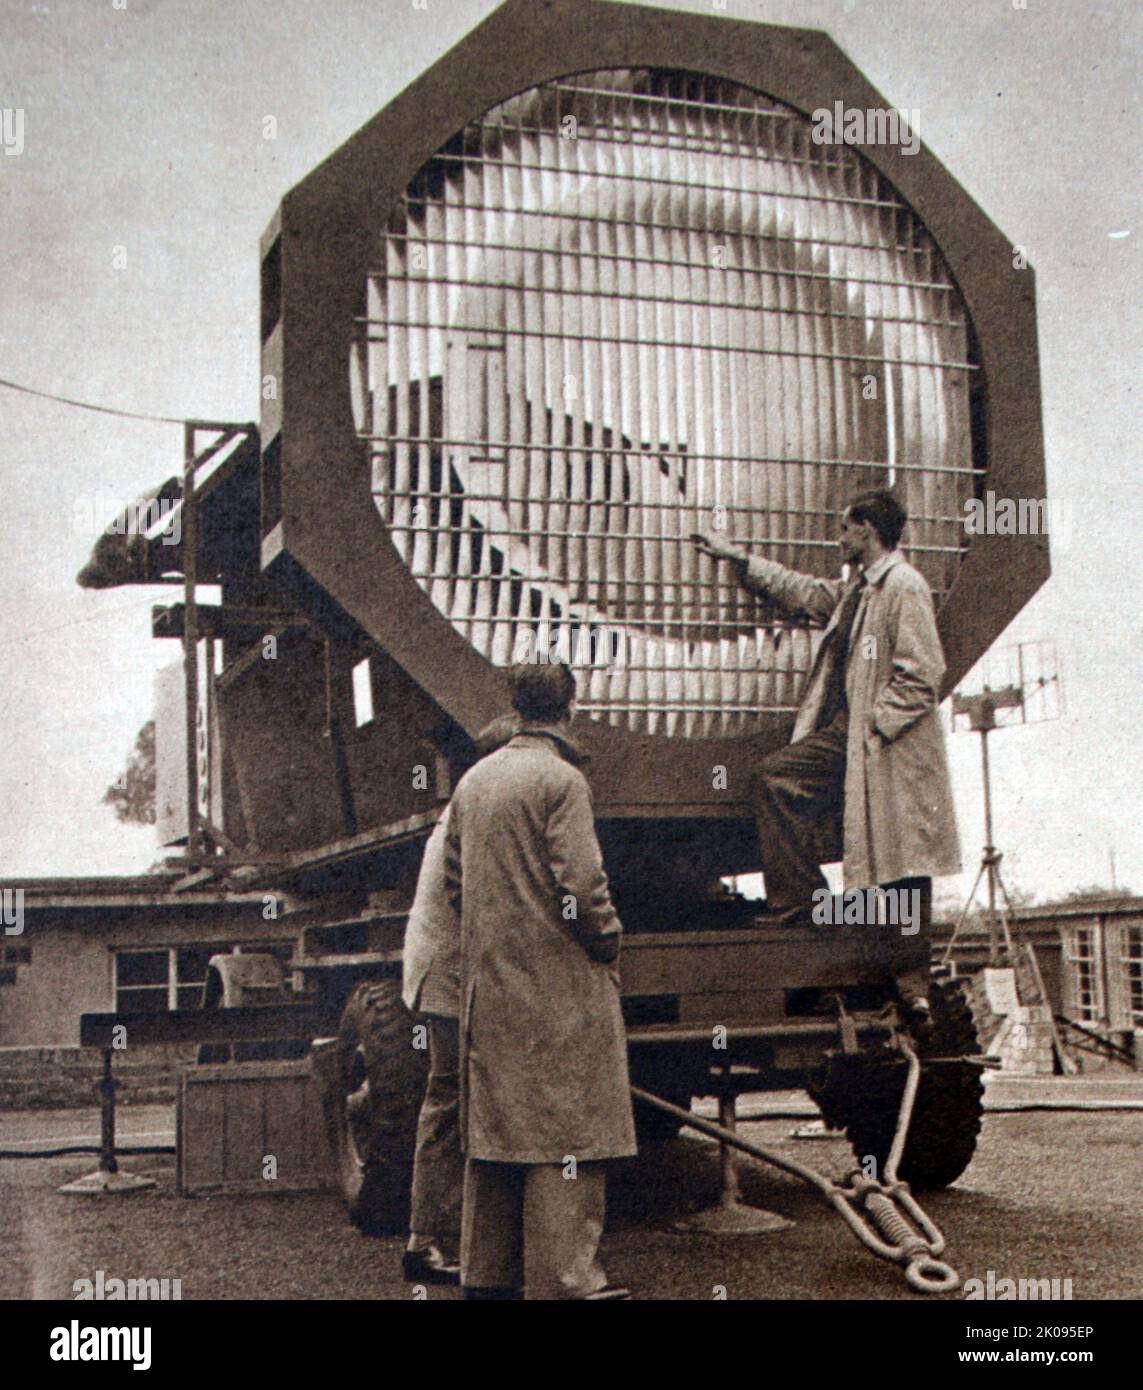 Ministry of Supply Radar Research and Development exhibition (RRDE). A wide angled scanning unit with lens aerial, exhibited at the radar research and development establishment. Stock Photo